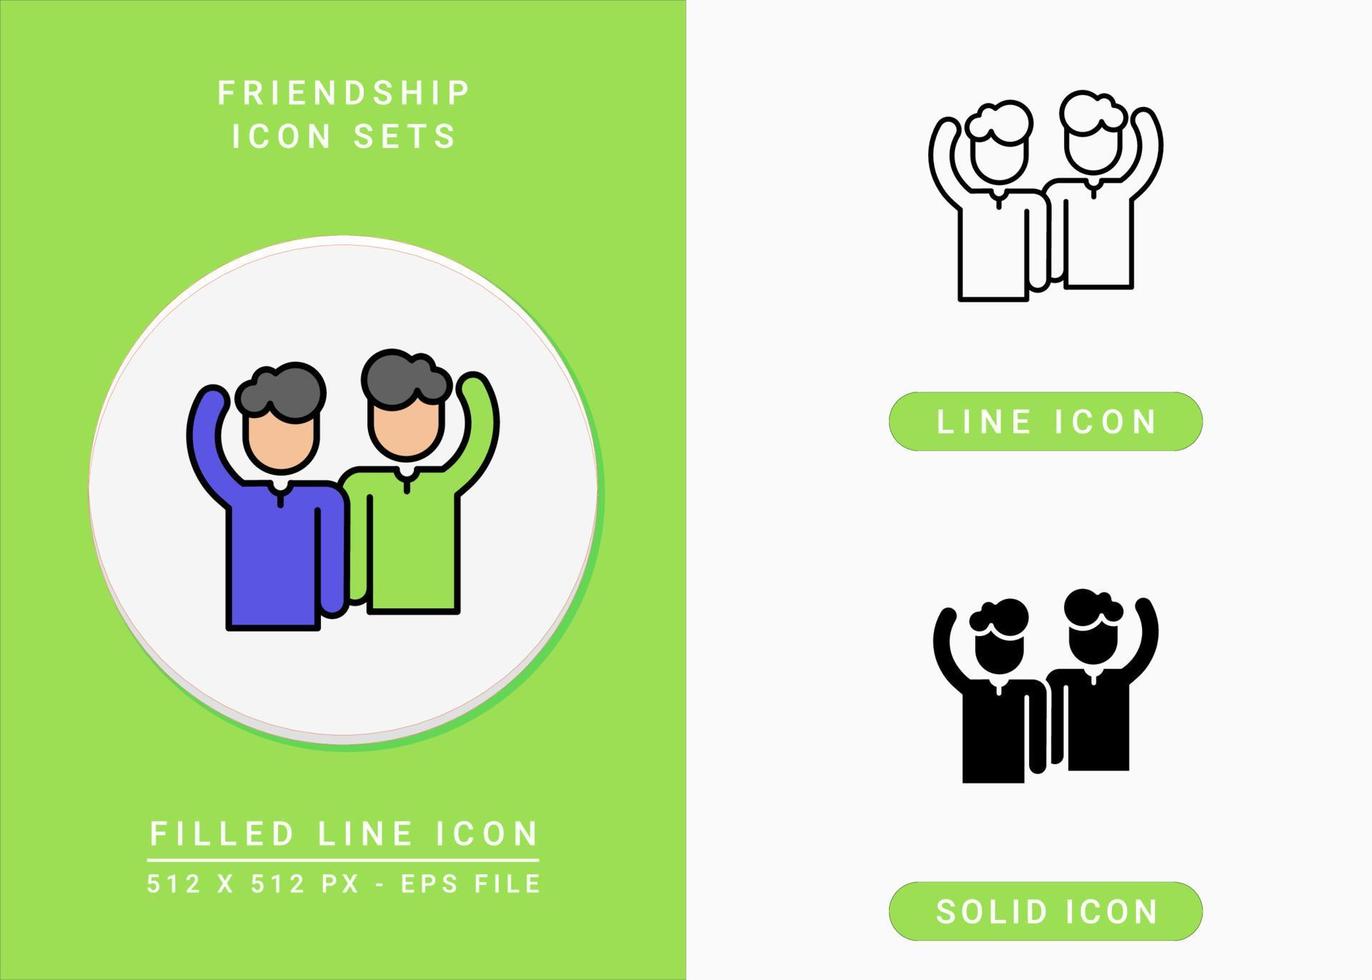 Friendship icons set vector illustration with solid icon line style. Buddy companion symbol. Editable stroke icon on isolated background for web design, infographic and UI mobile app.